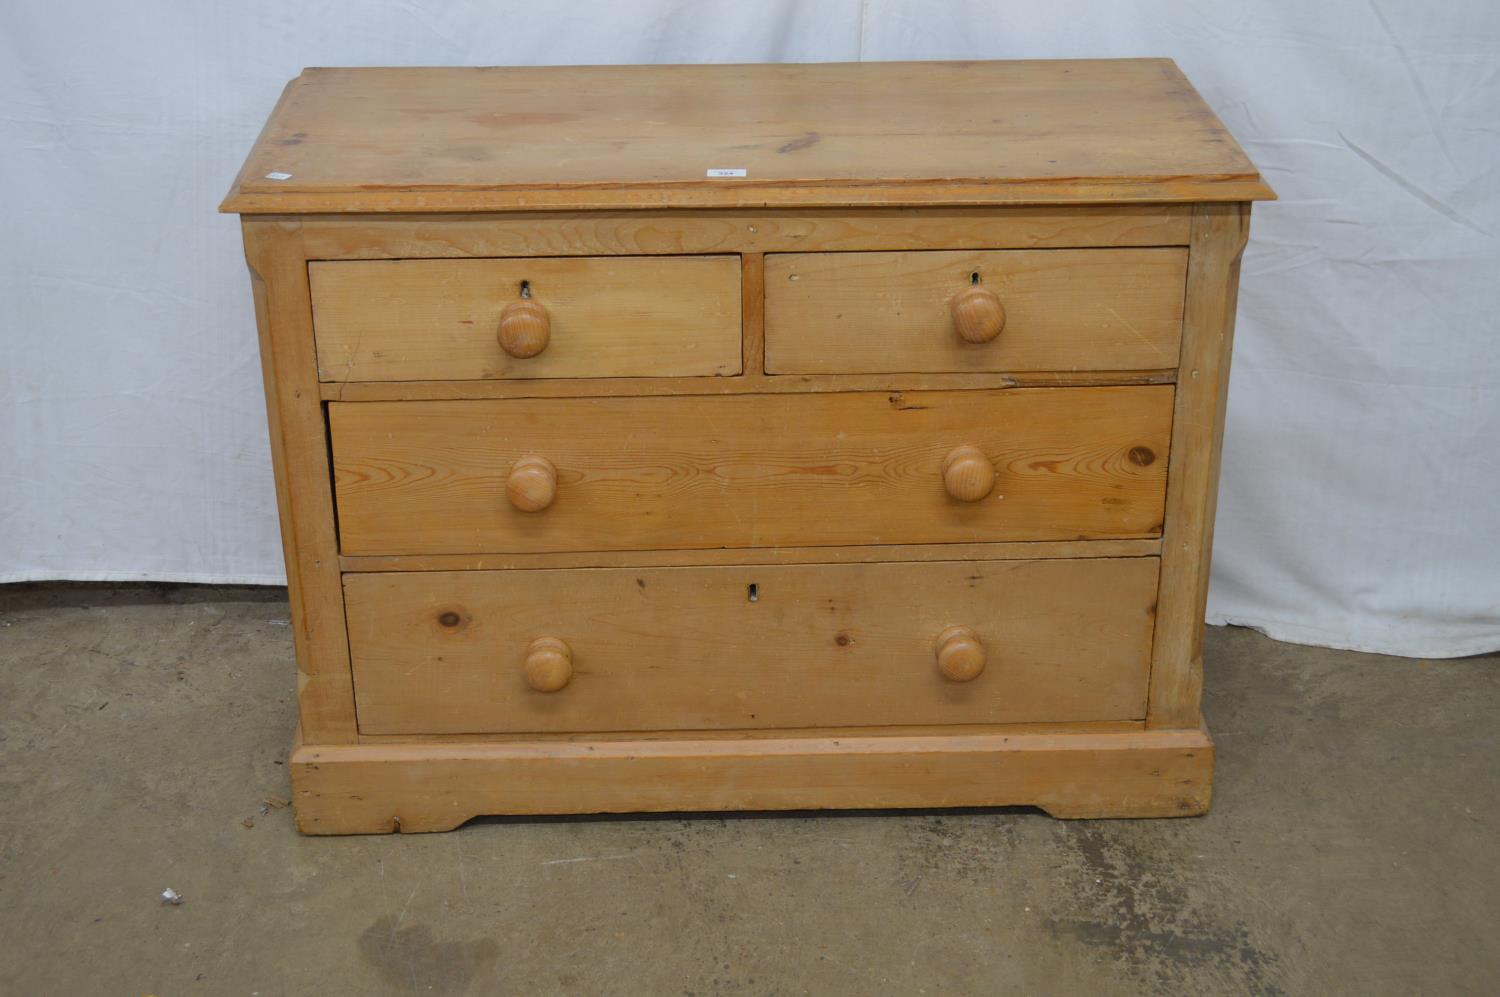 Victorian pine chest of two short and two long drawers with turned knob handles, the top having